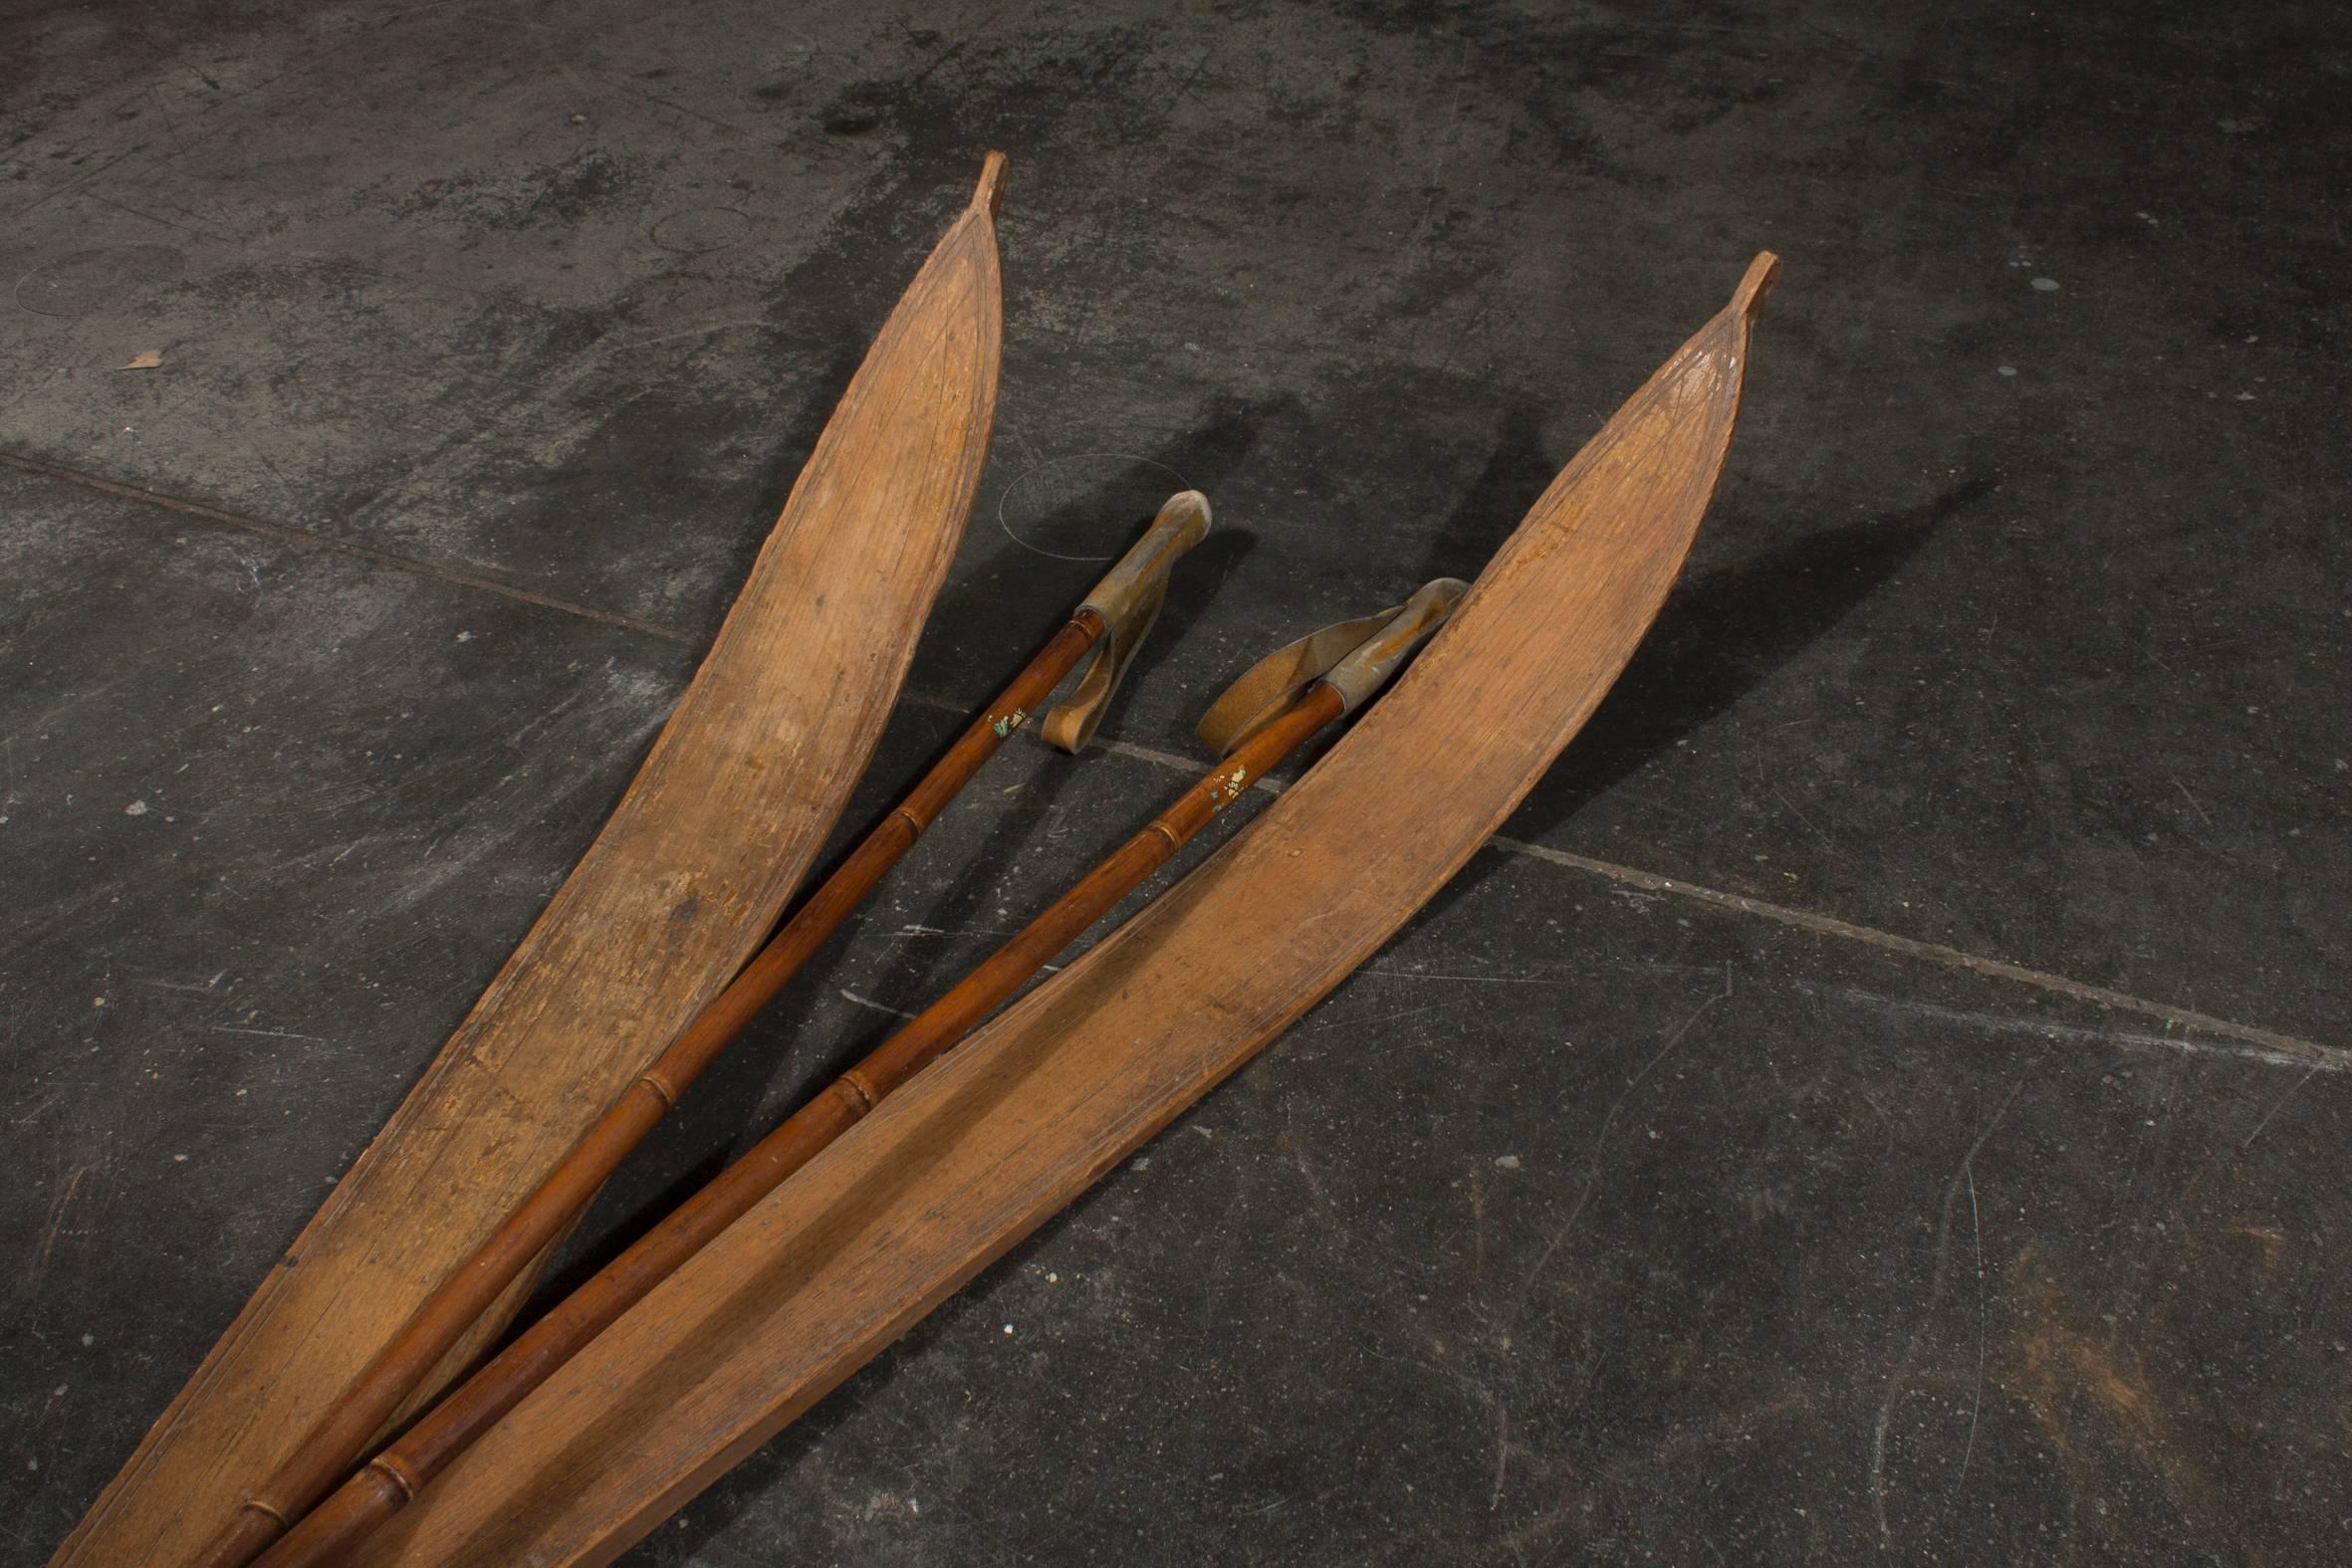 This very decorative set of c. 1920 skis is in good vintage condition - please find the detailed images for the technical parts